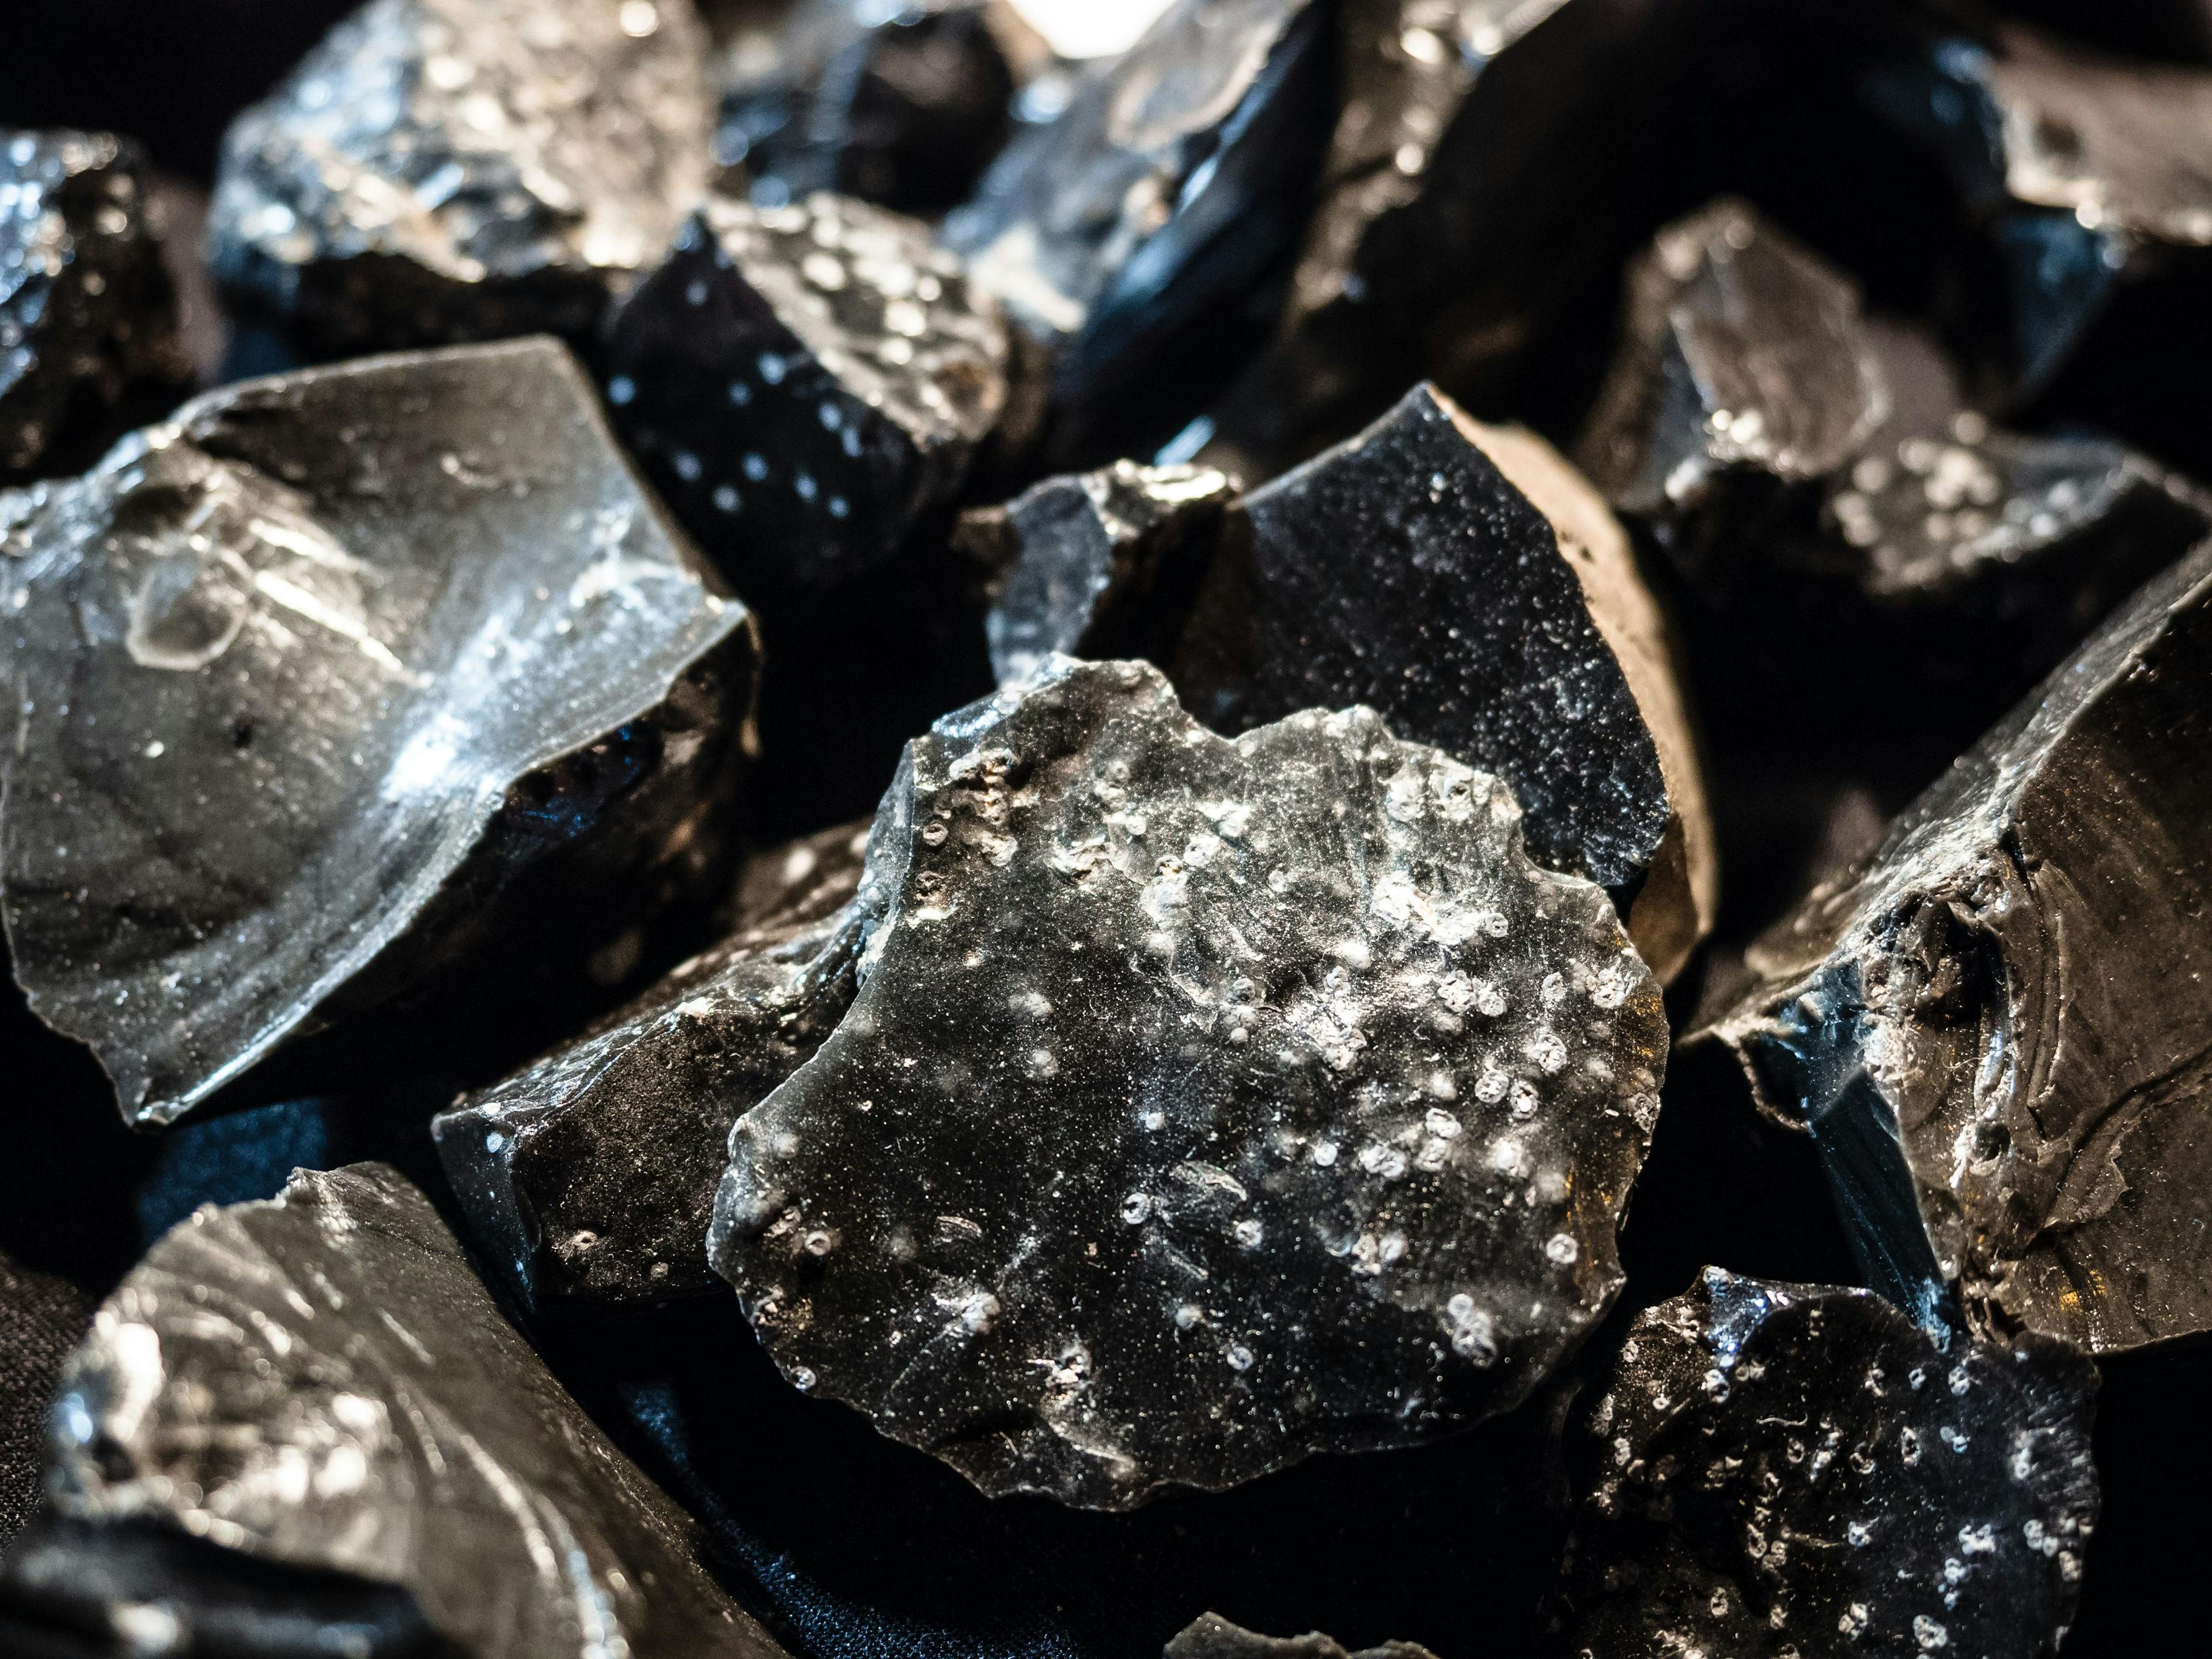 Pieces of graphite extracted from a mine. | Image Credit: © isaac74 - stock.adobe.com